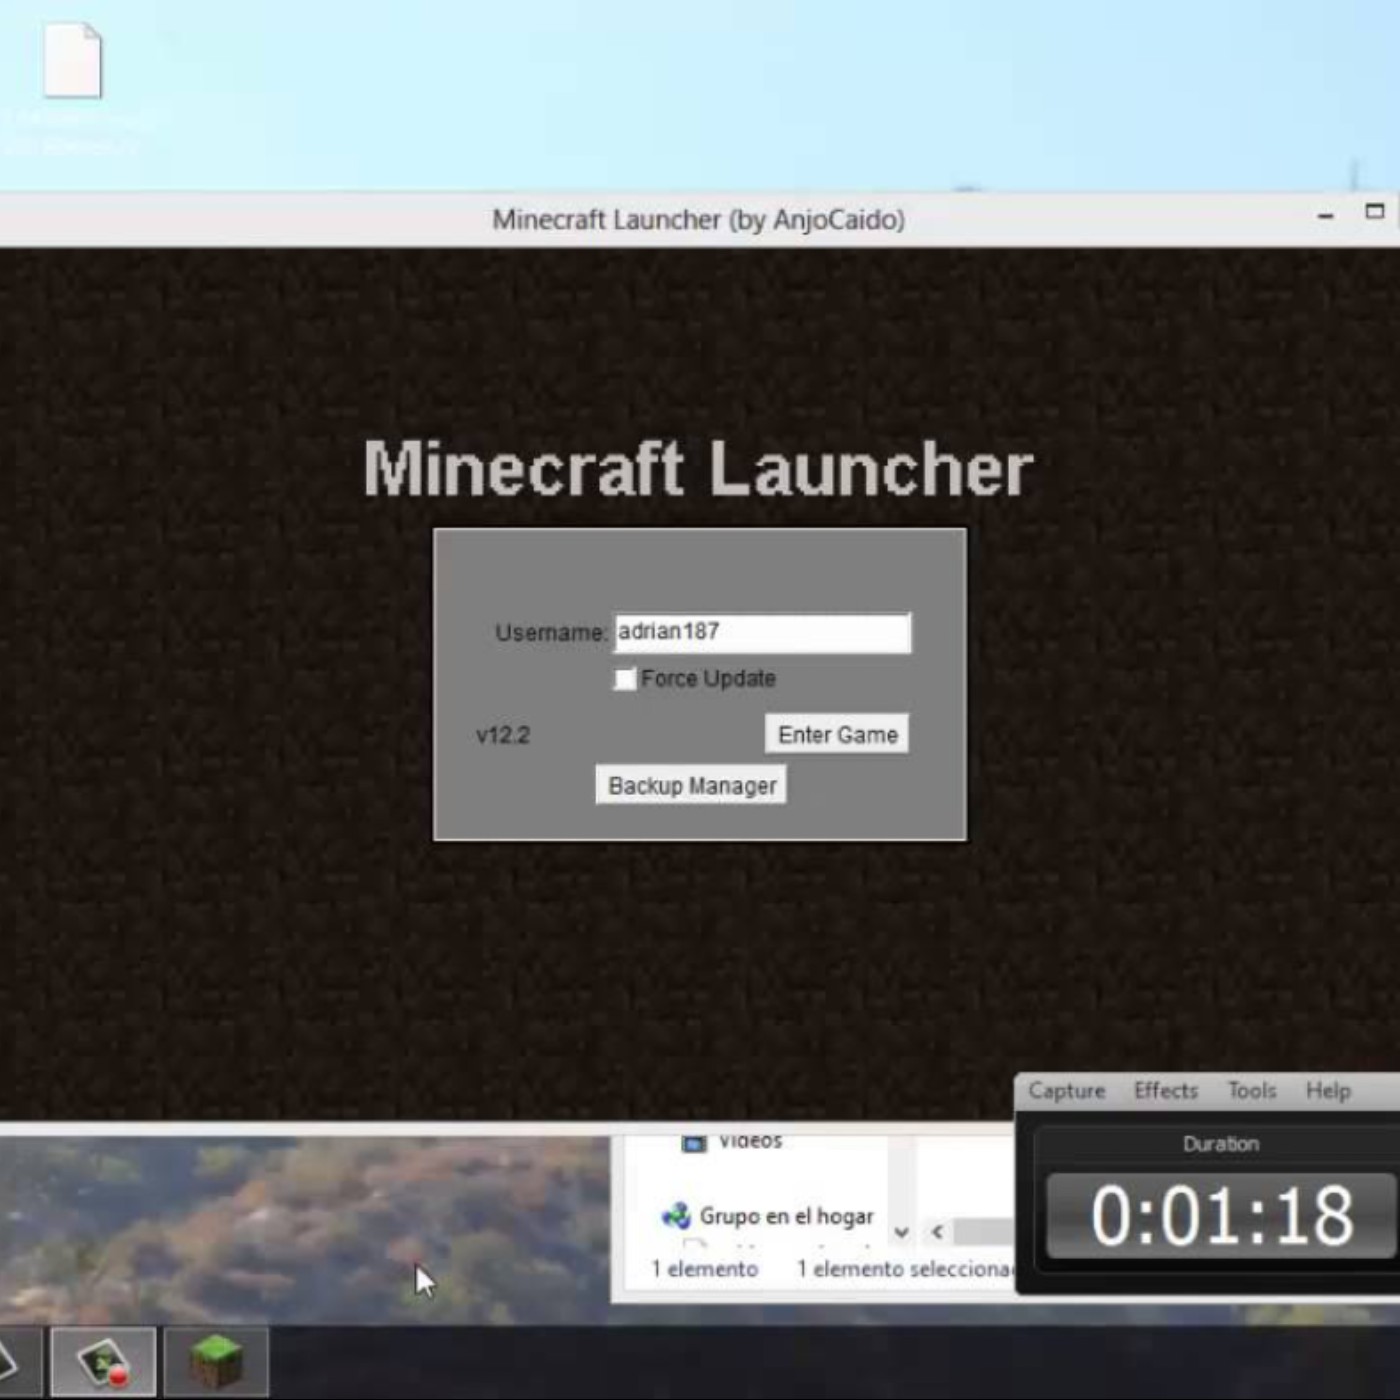 Download Minecraft 1.5 2 Cracked By Anjocaido Launcher | Podcast.